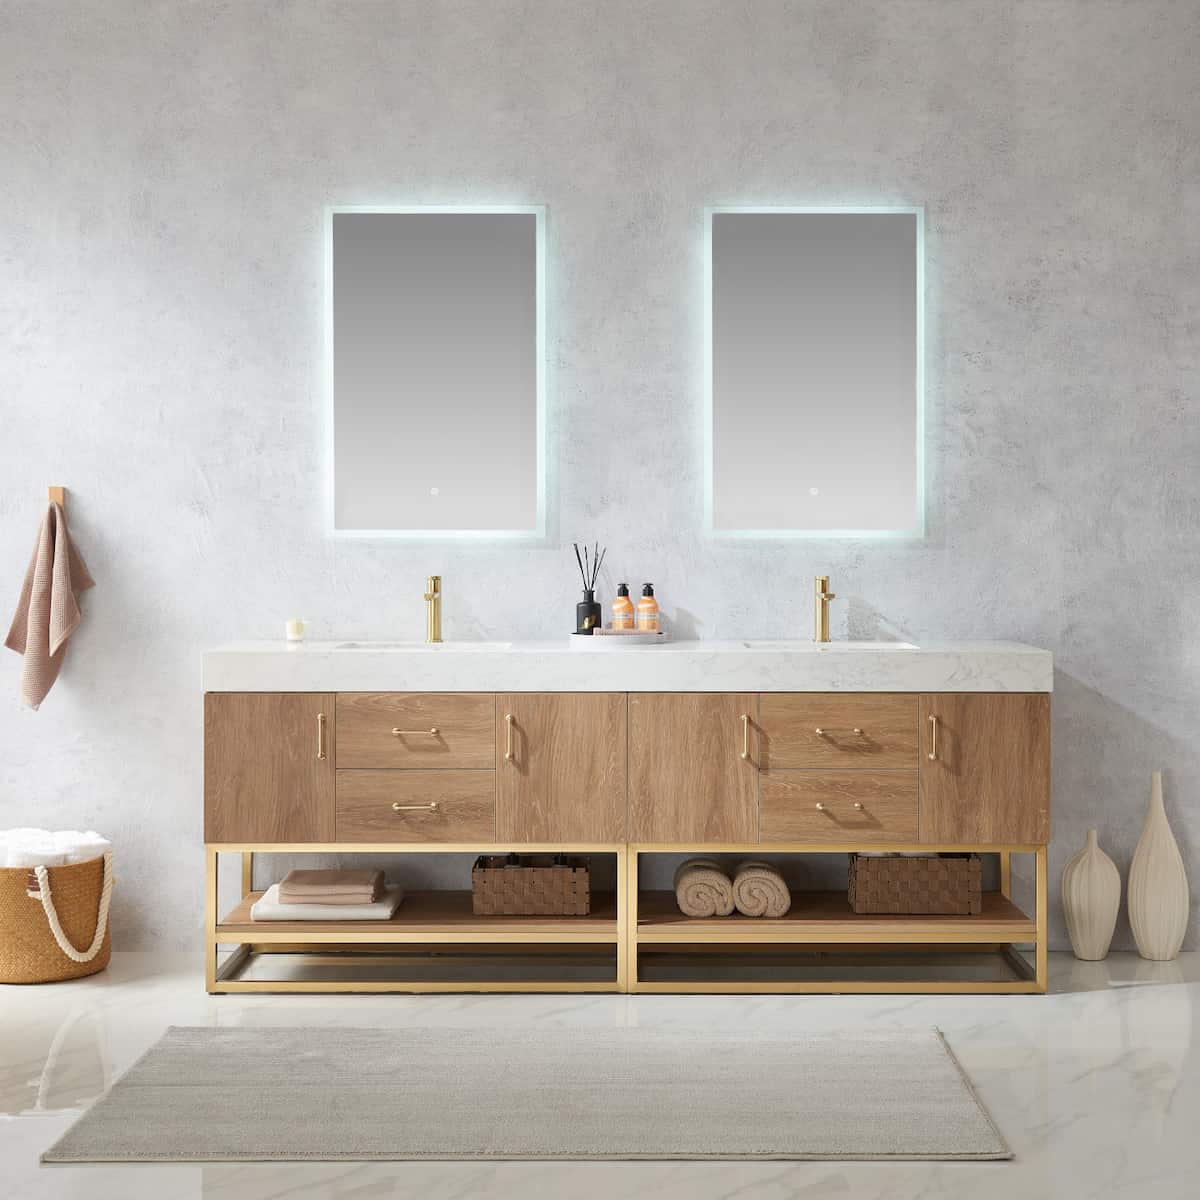 Vinnova Alistair 84 Inch Freestanding Double Vanity in North American Oak and Brushed Gold Frame with White Grain Stone Countertop With Mirrors in Bathroom 789084-NO-GW